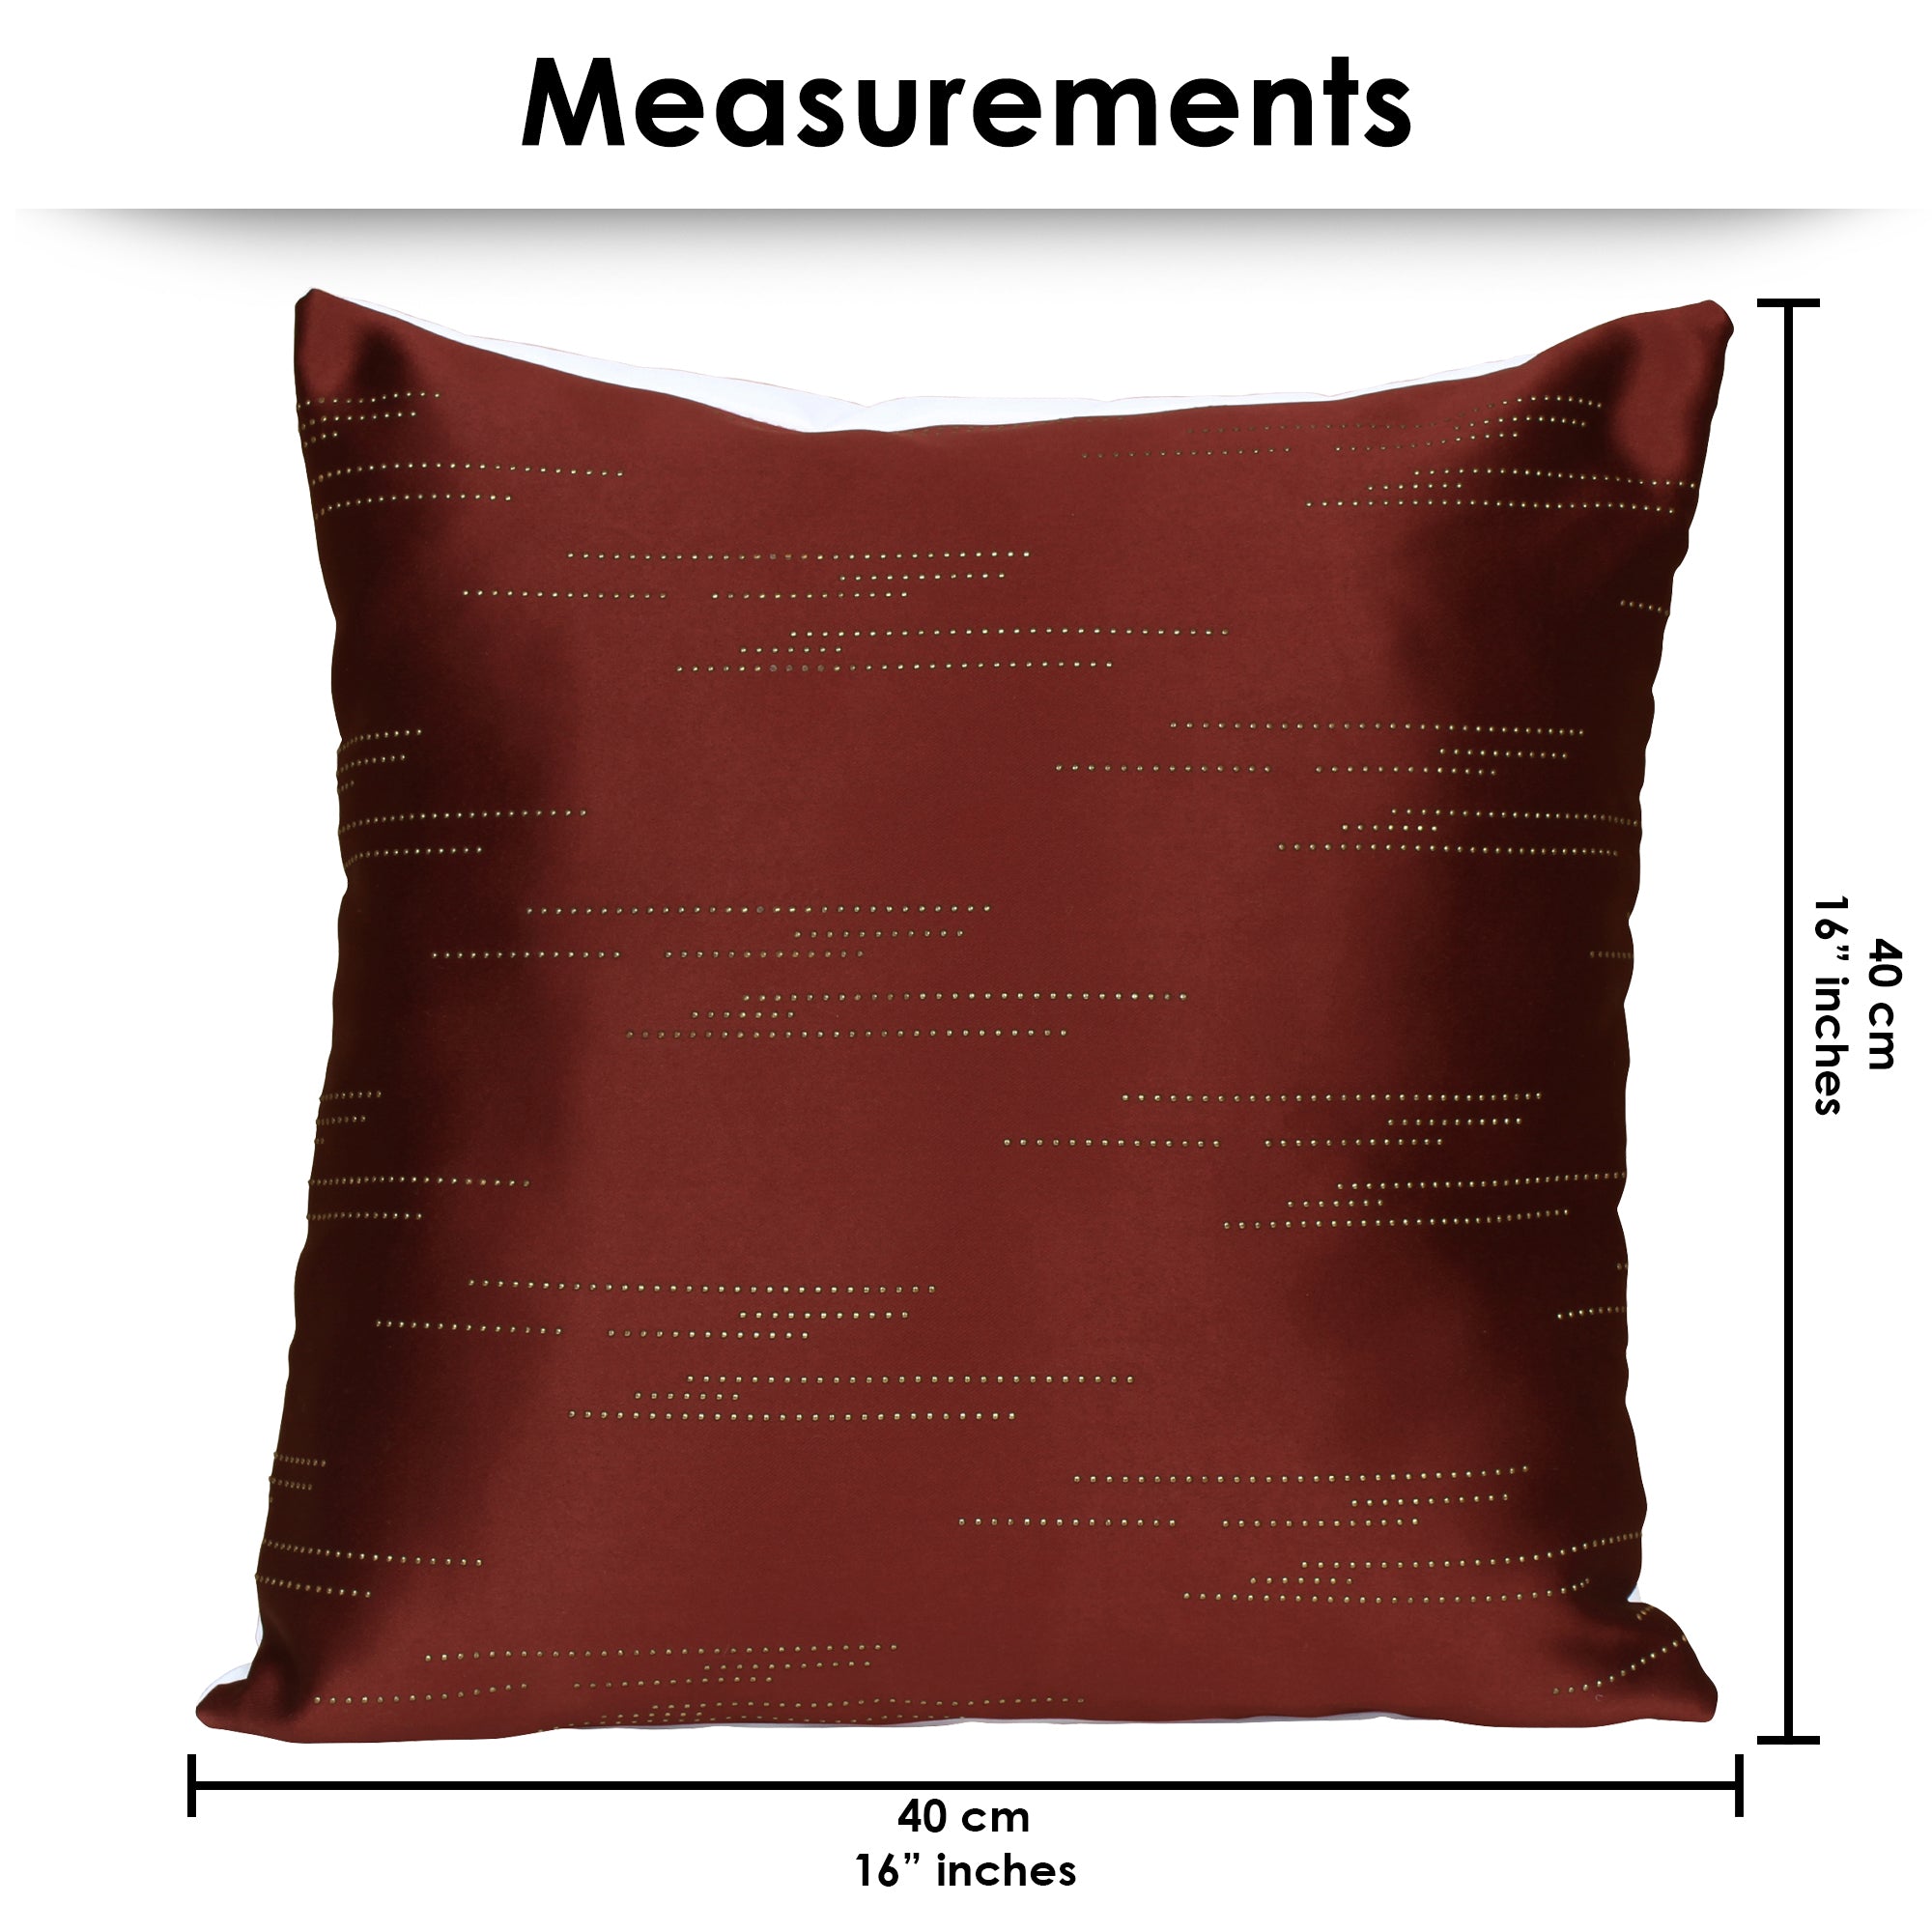 ALEGRA CUSHION COVERS 16 x 16 - RED COLOR